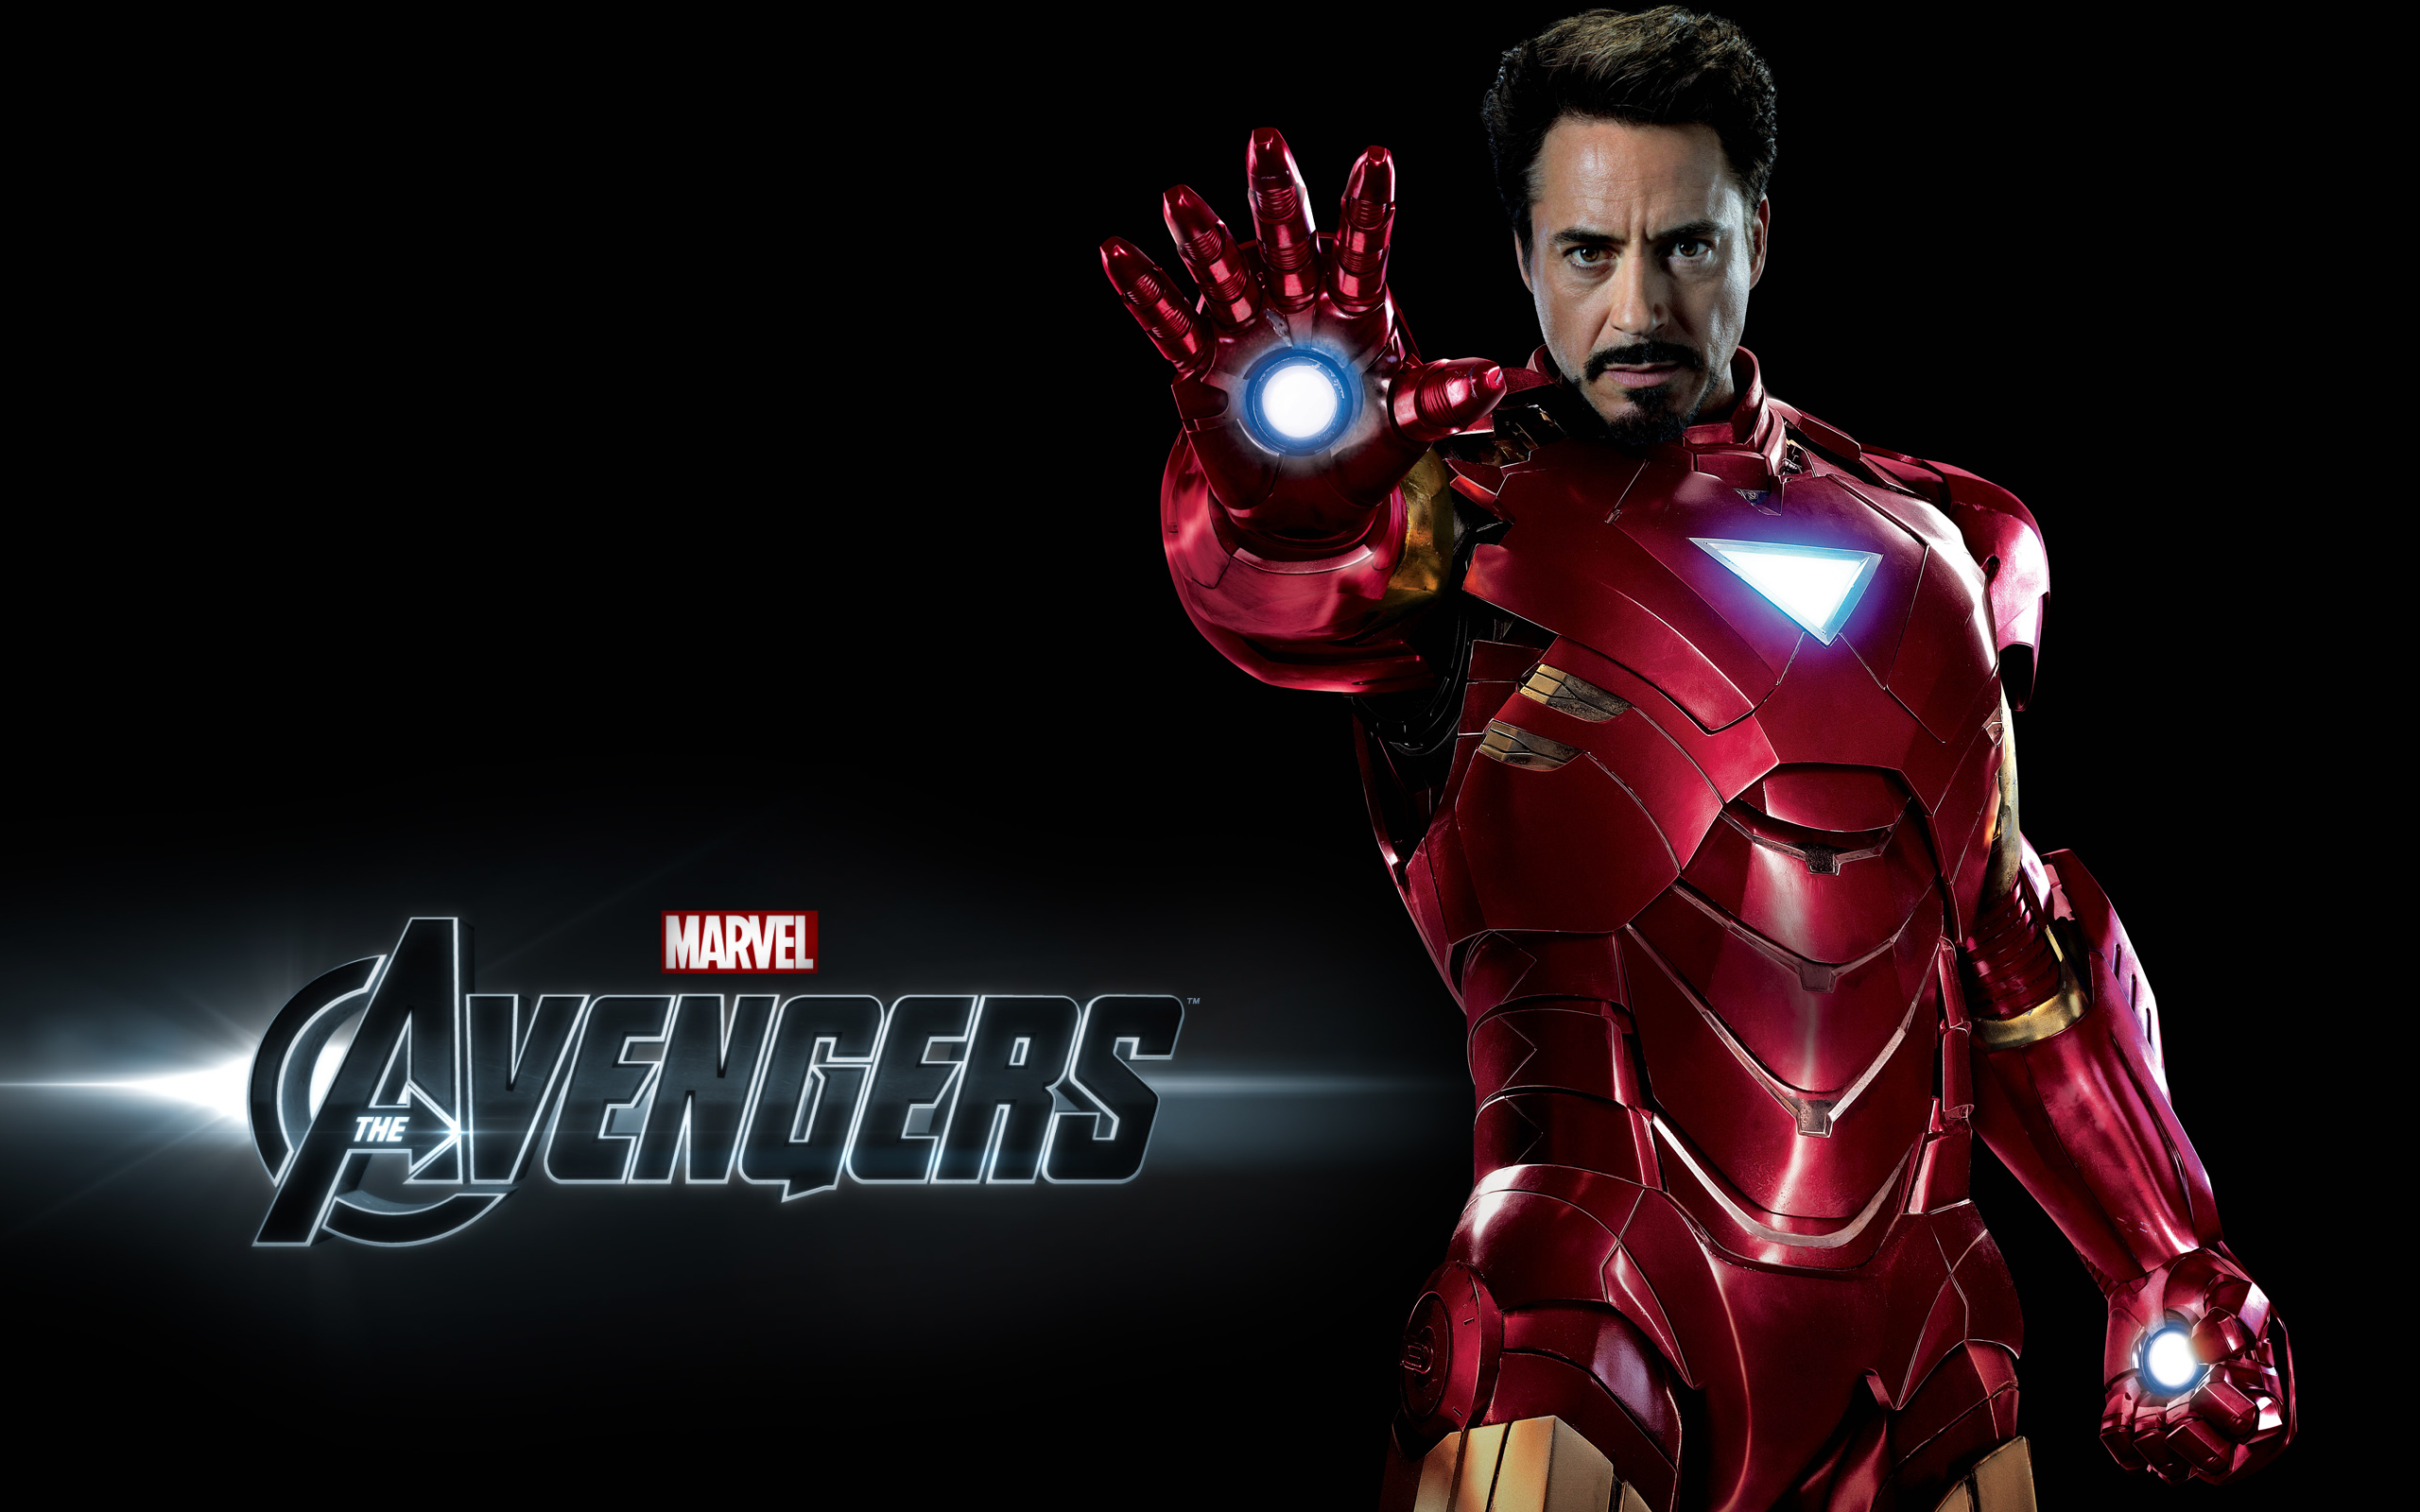 Marvels Avengers Wallpapers HD The Avengers Iron Man HD 2560x1600